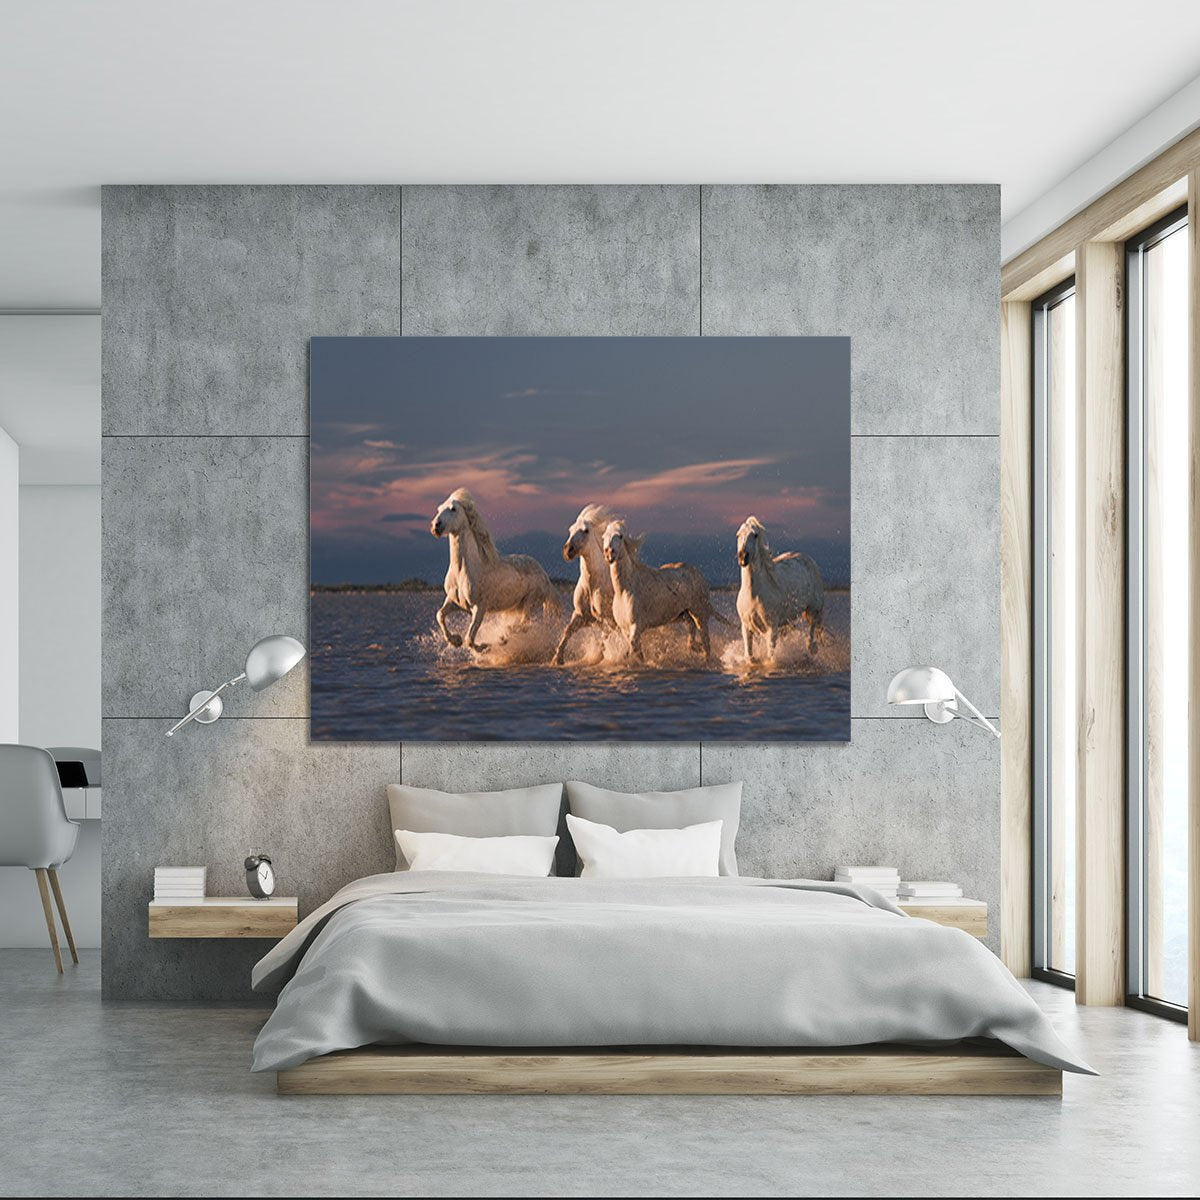 Wite Horses Running In Water 2 Canvas Print or Poster - Canvas Art Rocks - 5